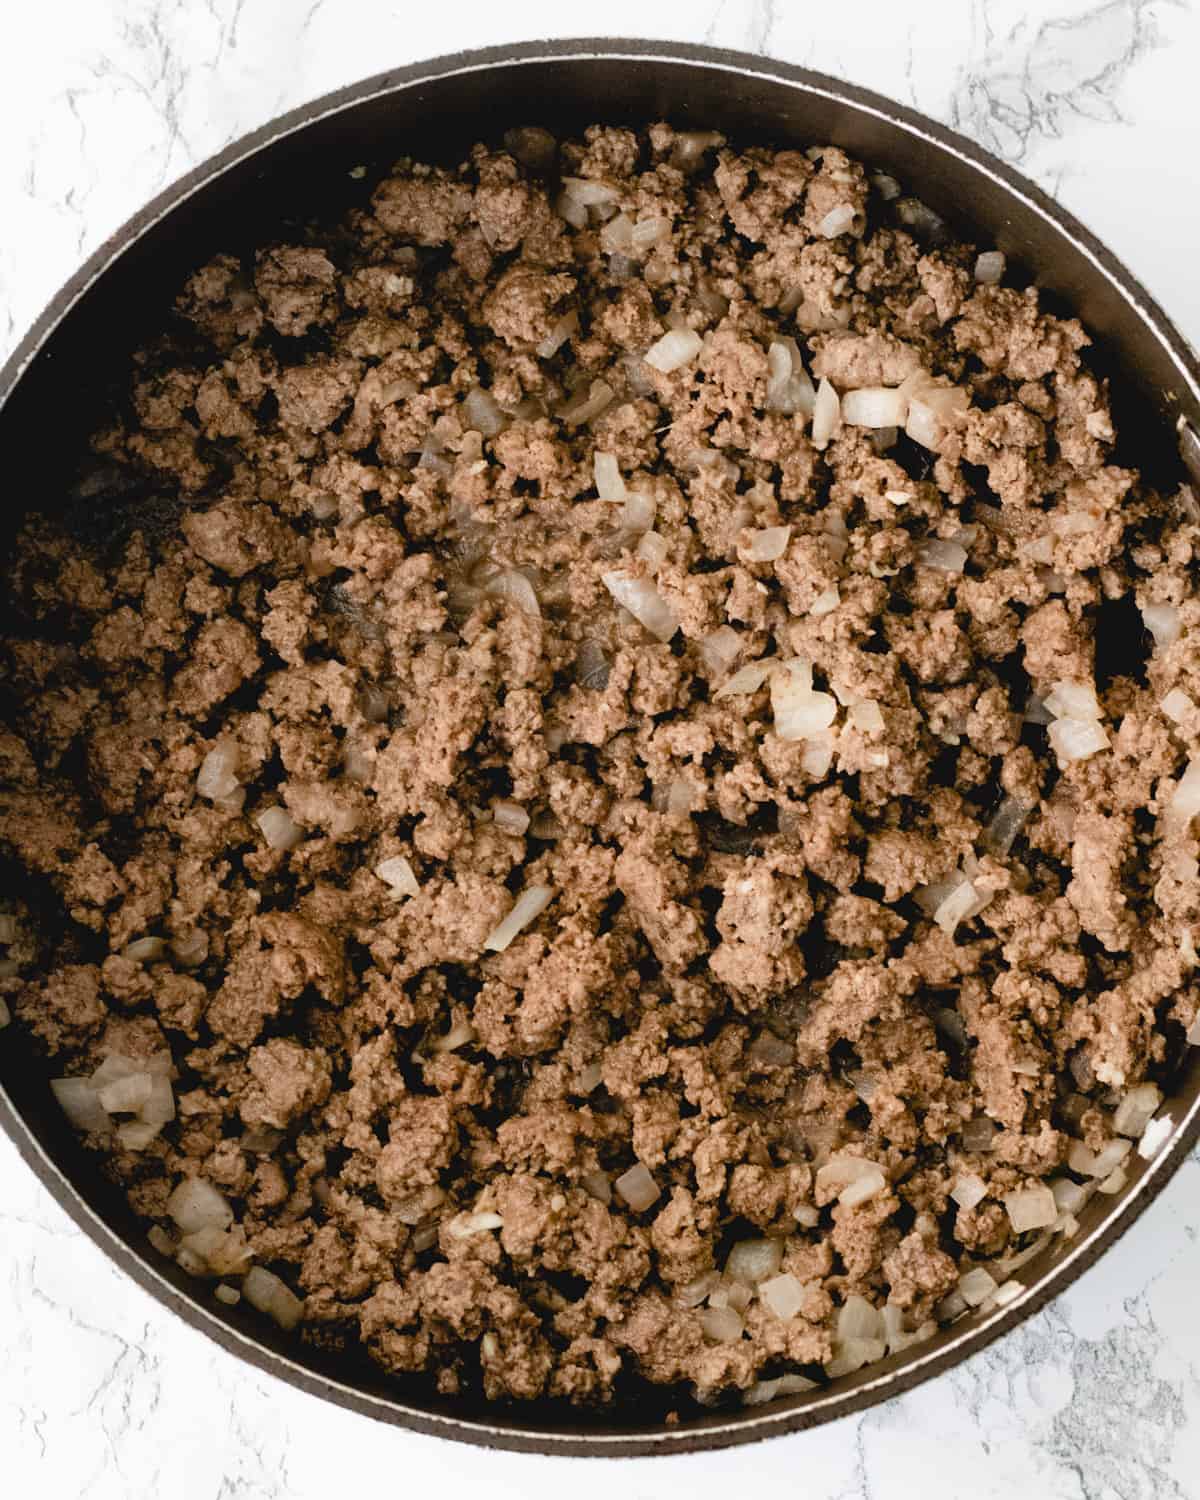 Cooked ground beef and onions in a pan.